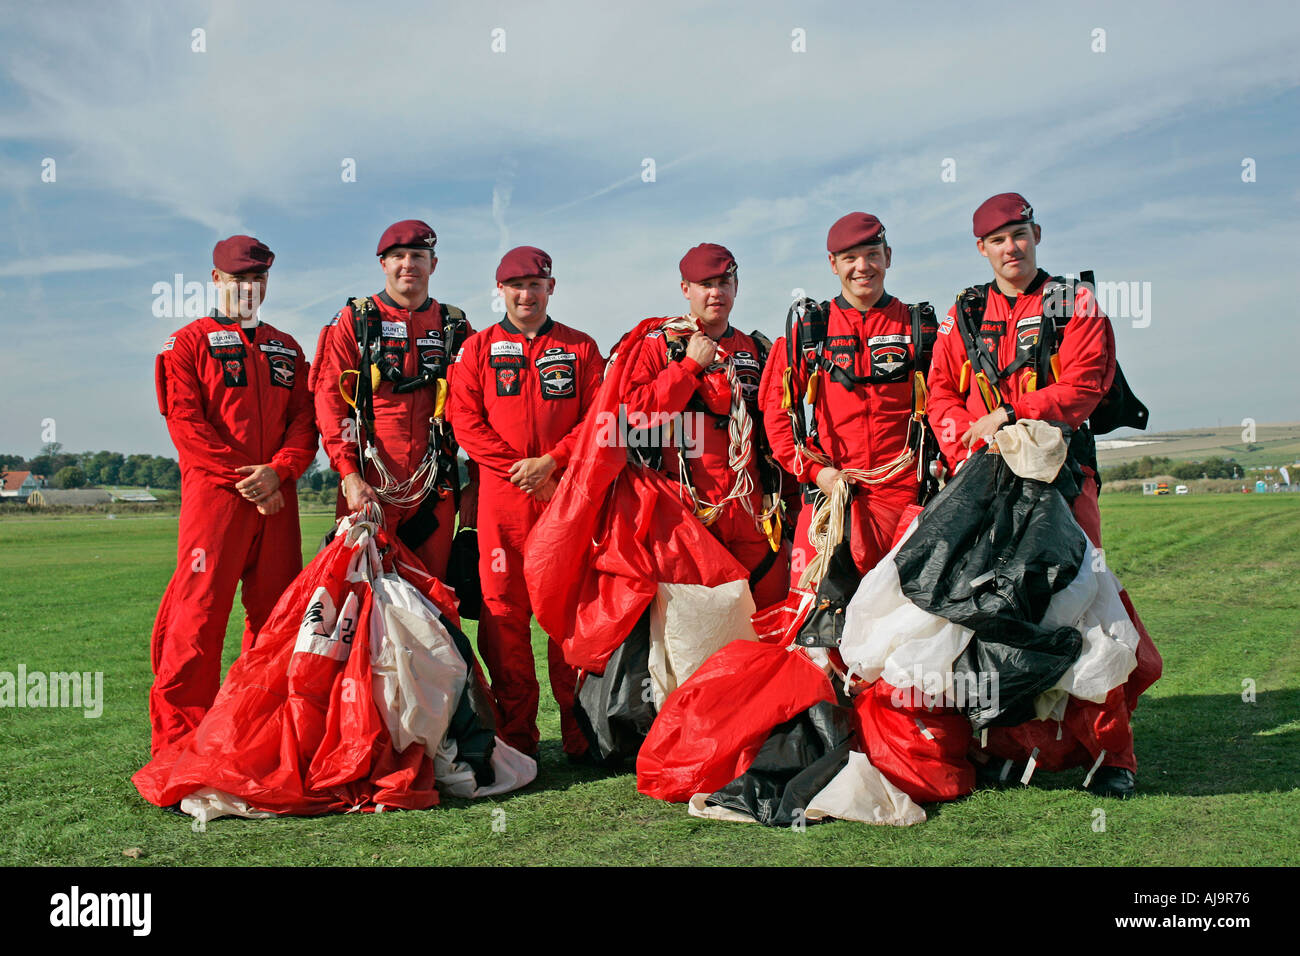 Six members of the Army Red Devils Parachute Display team Stock Photo -  Alamy